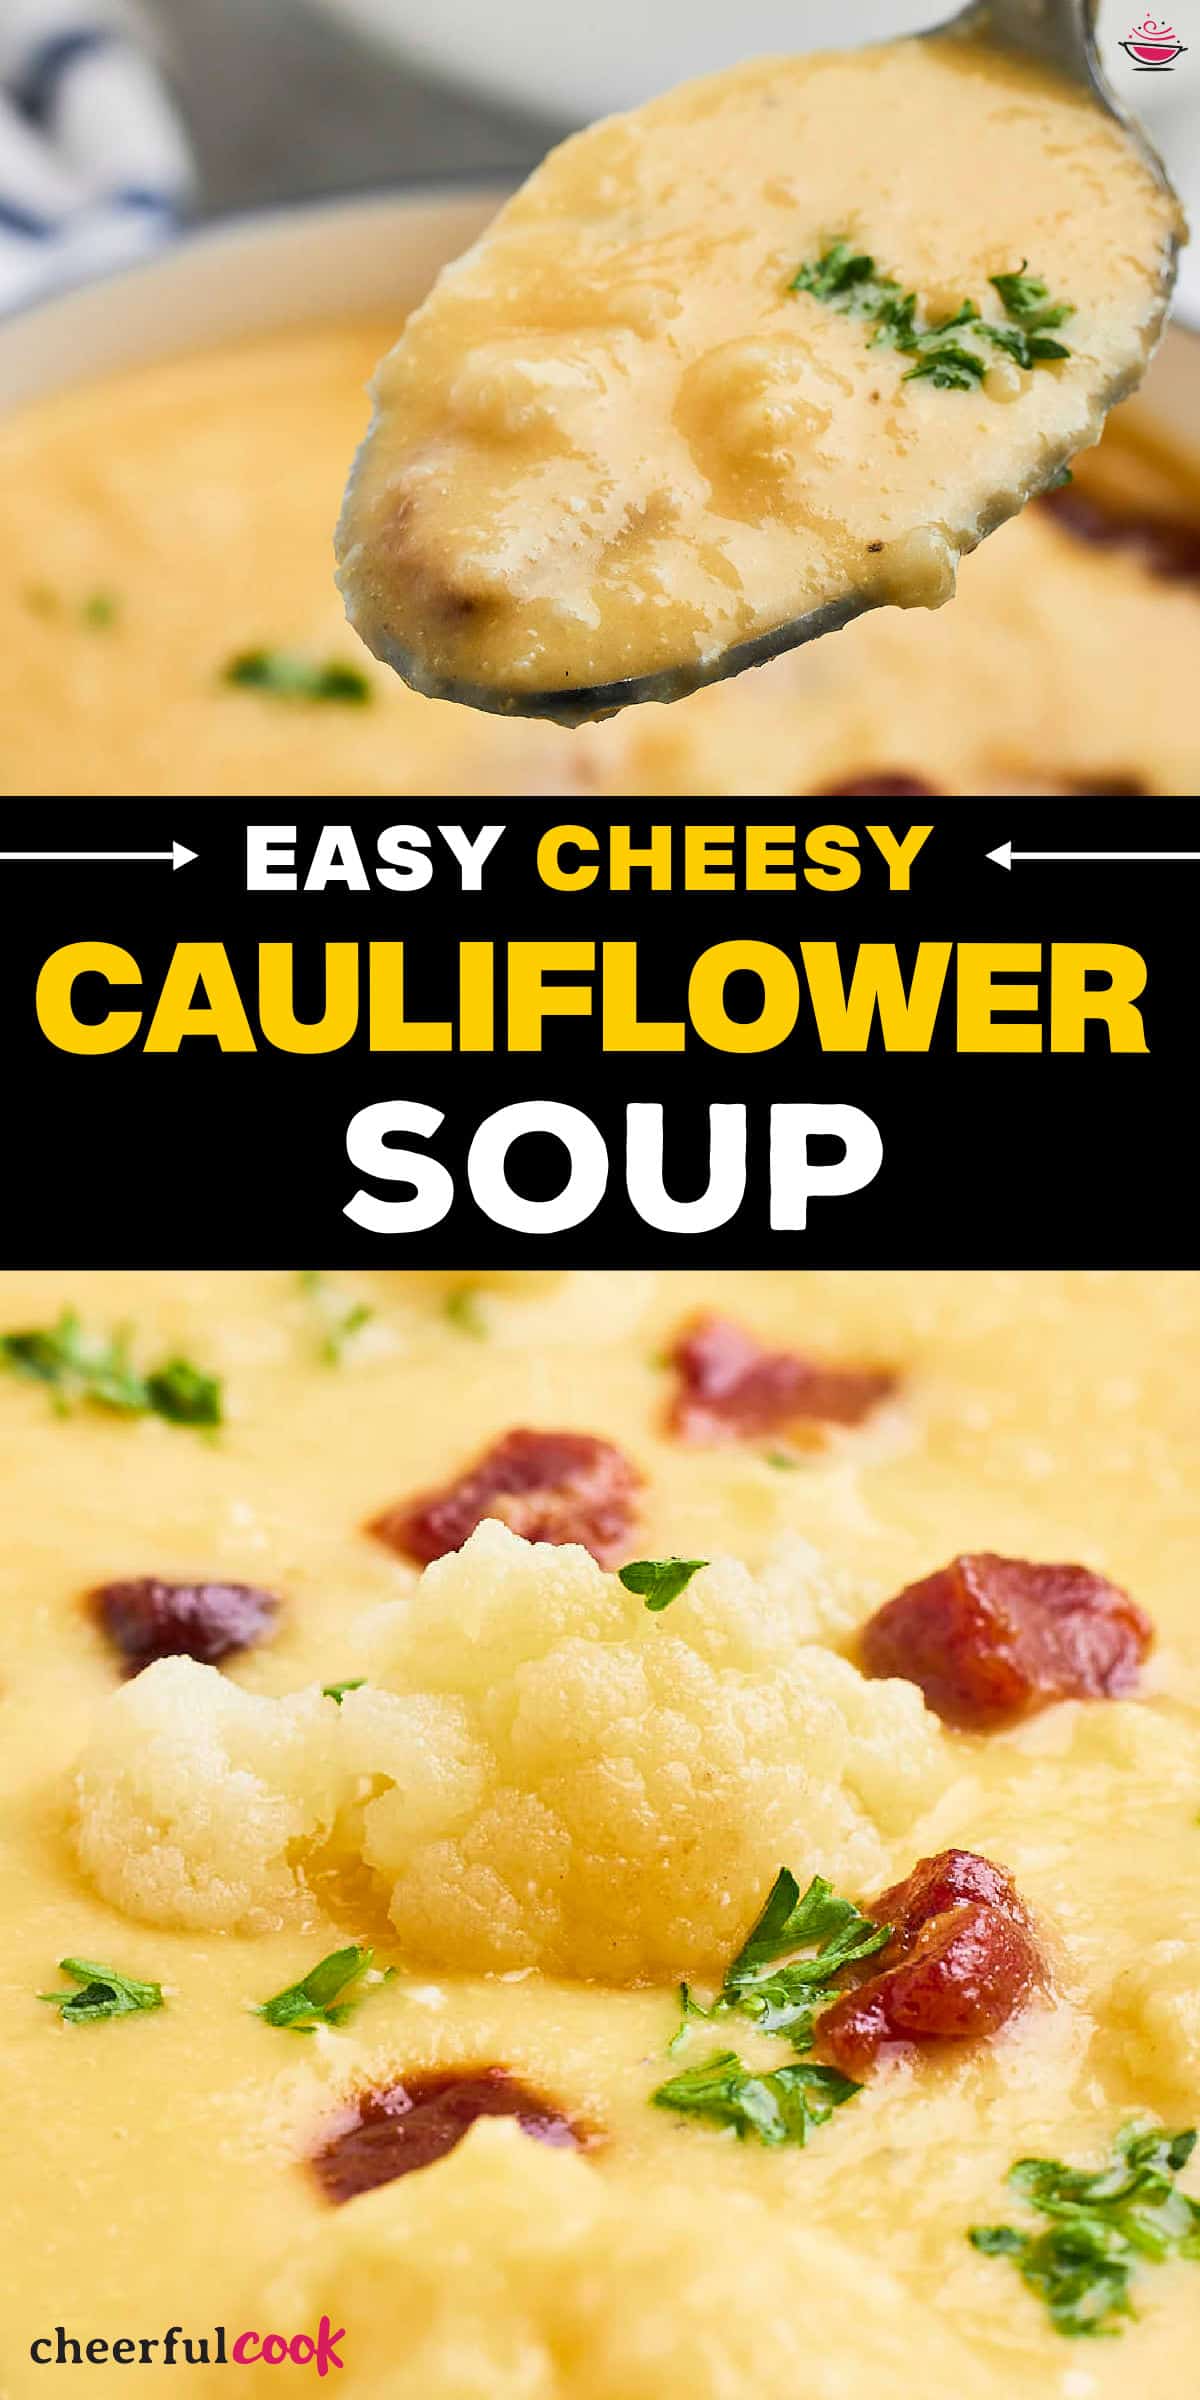 Looking for a tasty and fast way to get cozy? Our delicious limited-ingredient cauliflower soup is here! You can choose how you want it; blended, smooth, or chunky. Make the perfect bowlful in no time - just warm up, eat up and enjoy !#cheerfulcook #cauliflowersoup #soup #souprecipe #cheesy #cauliflowercheddar #soup #cheesy #easy via @cheerfulcook